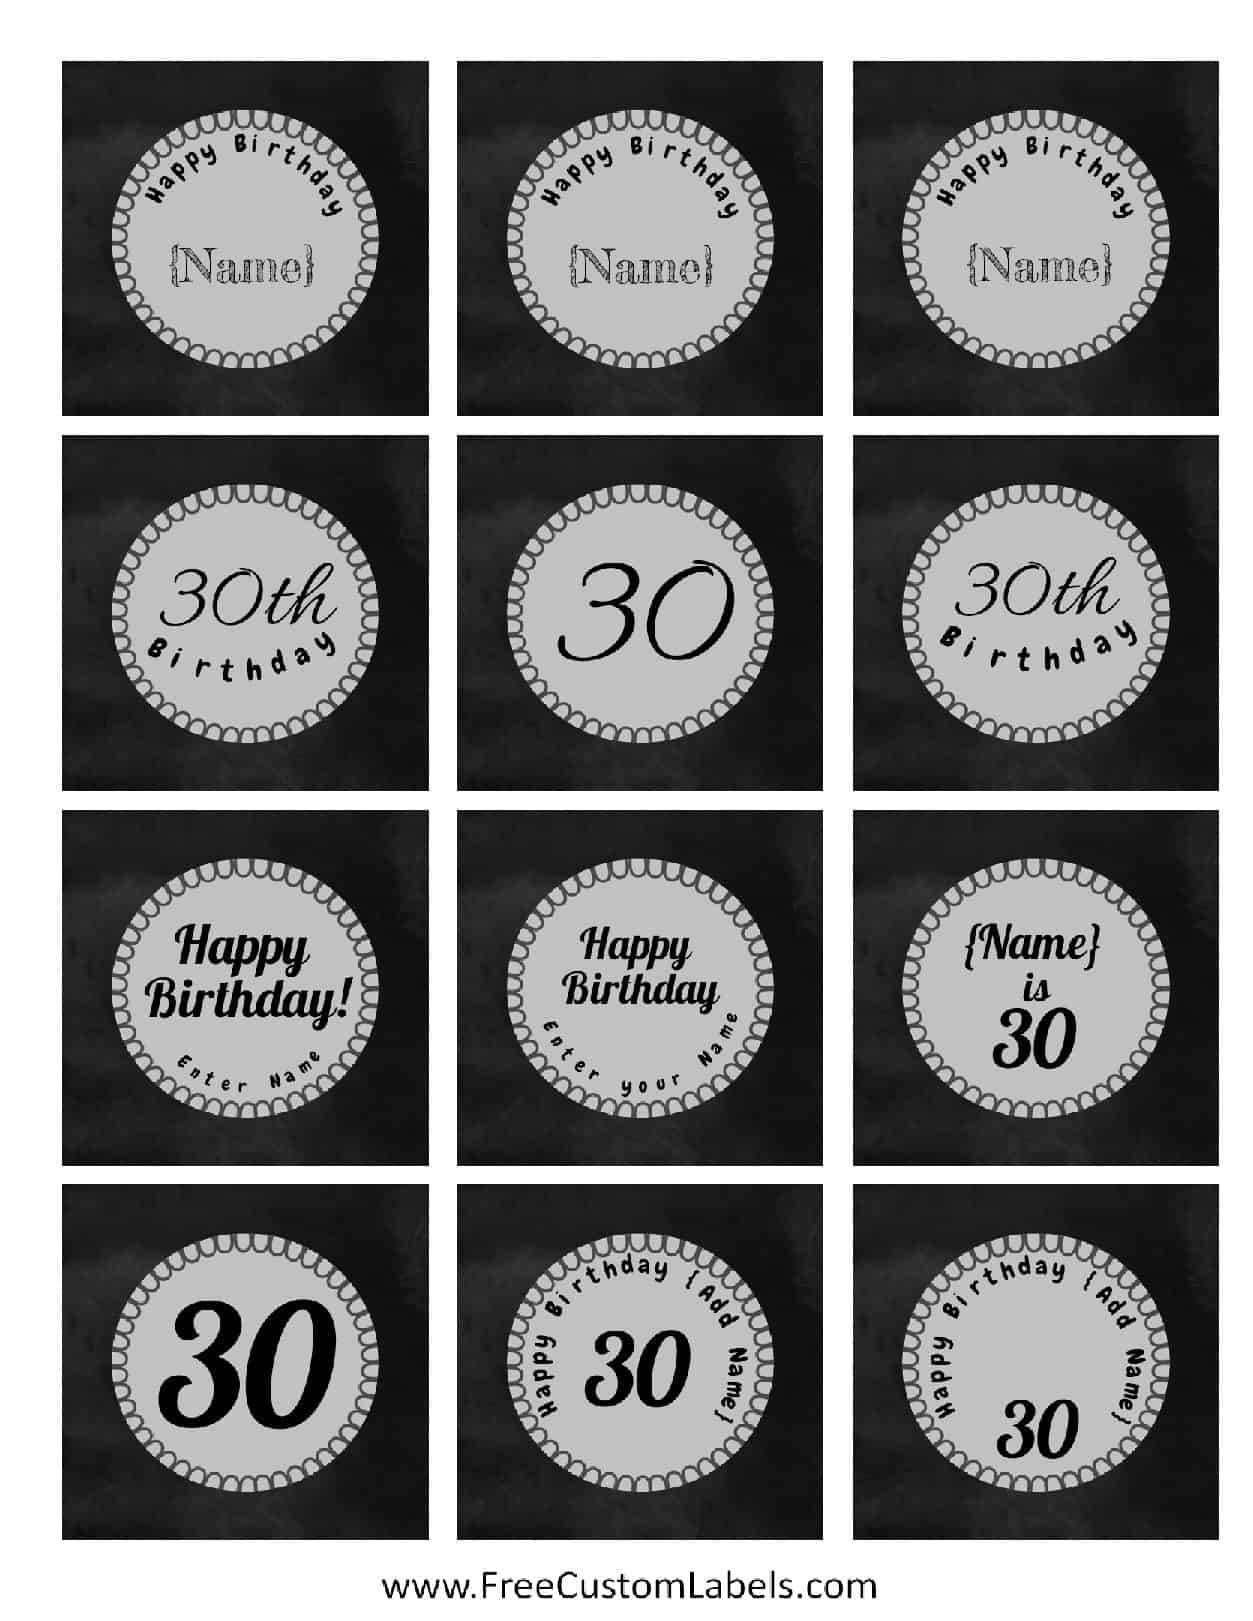 Up to 30 edible letters Arial Black Font cake, cupcake toppers